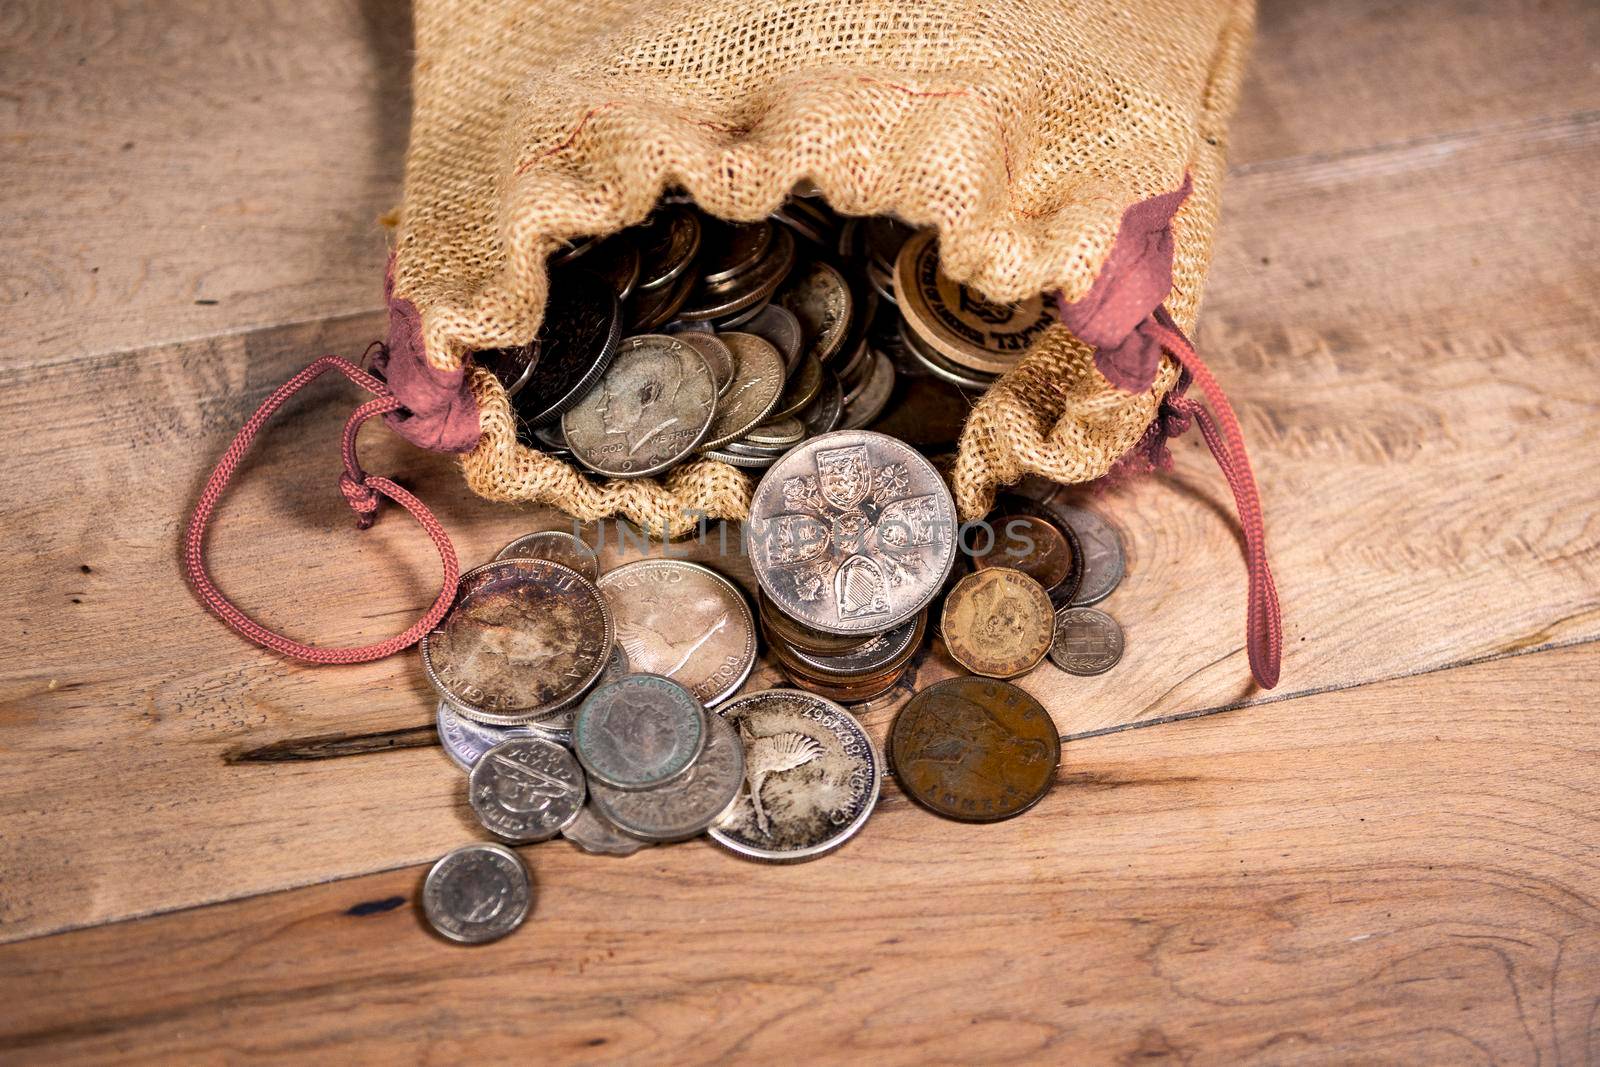 A collection of old  and new coins lies in a canvas bag on the floor